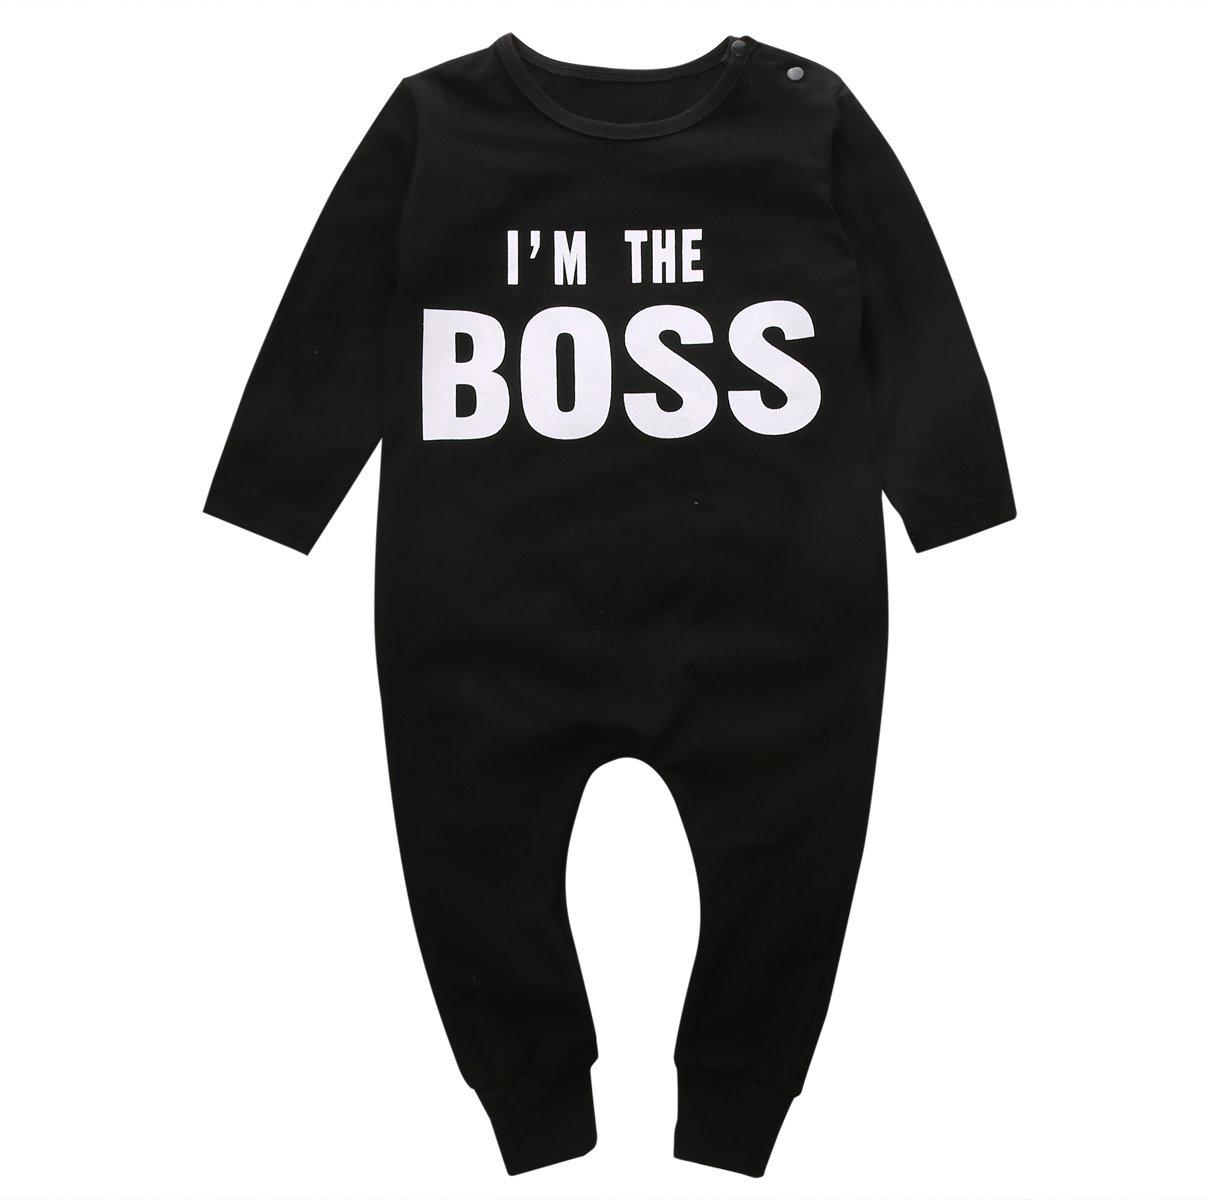 I'm The Boss Baby Toddler Trendy Fashion Romper - Just Kidding Store